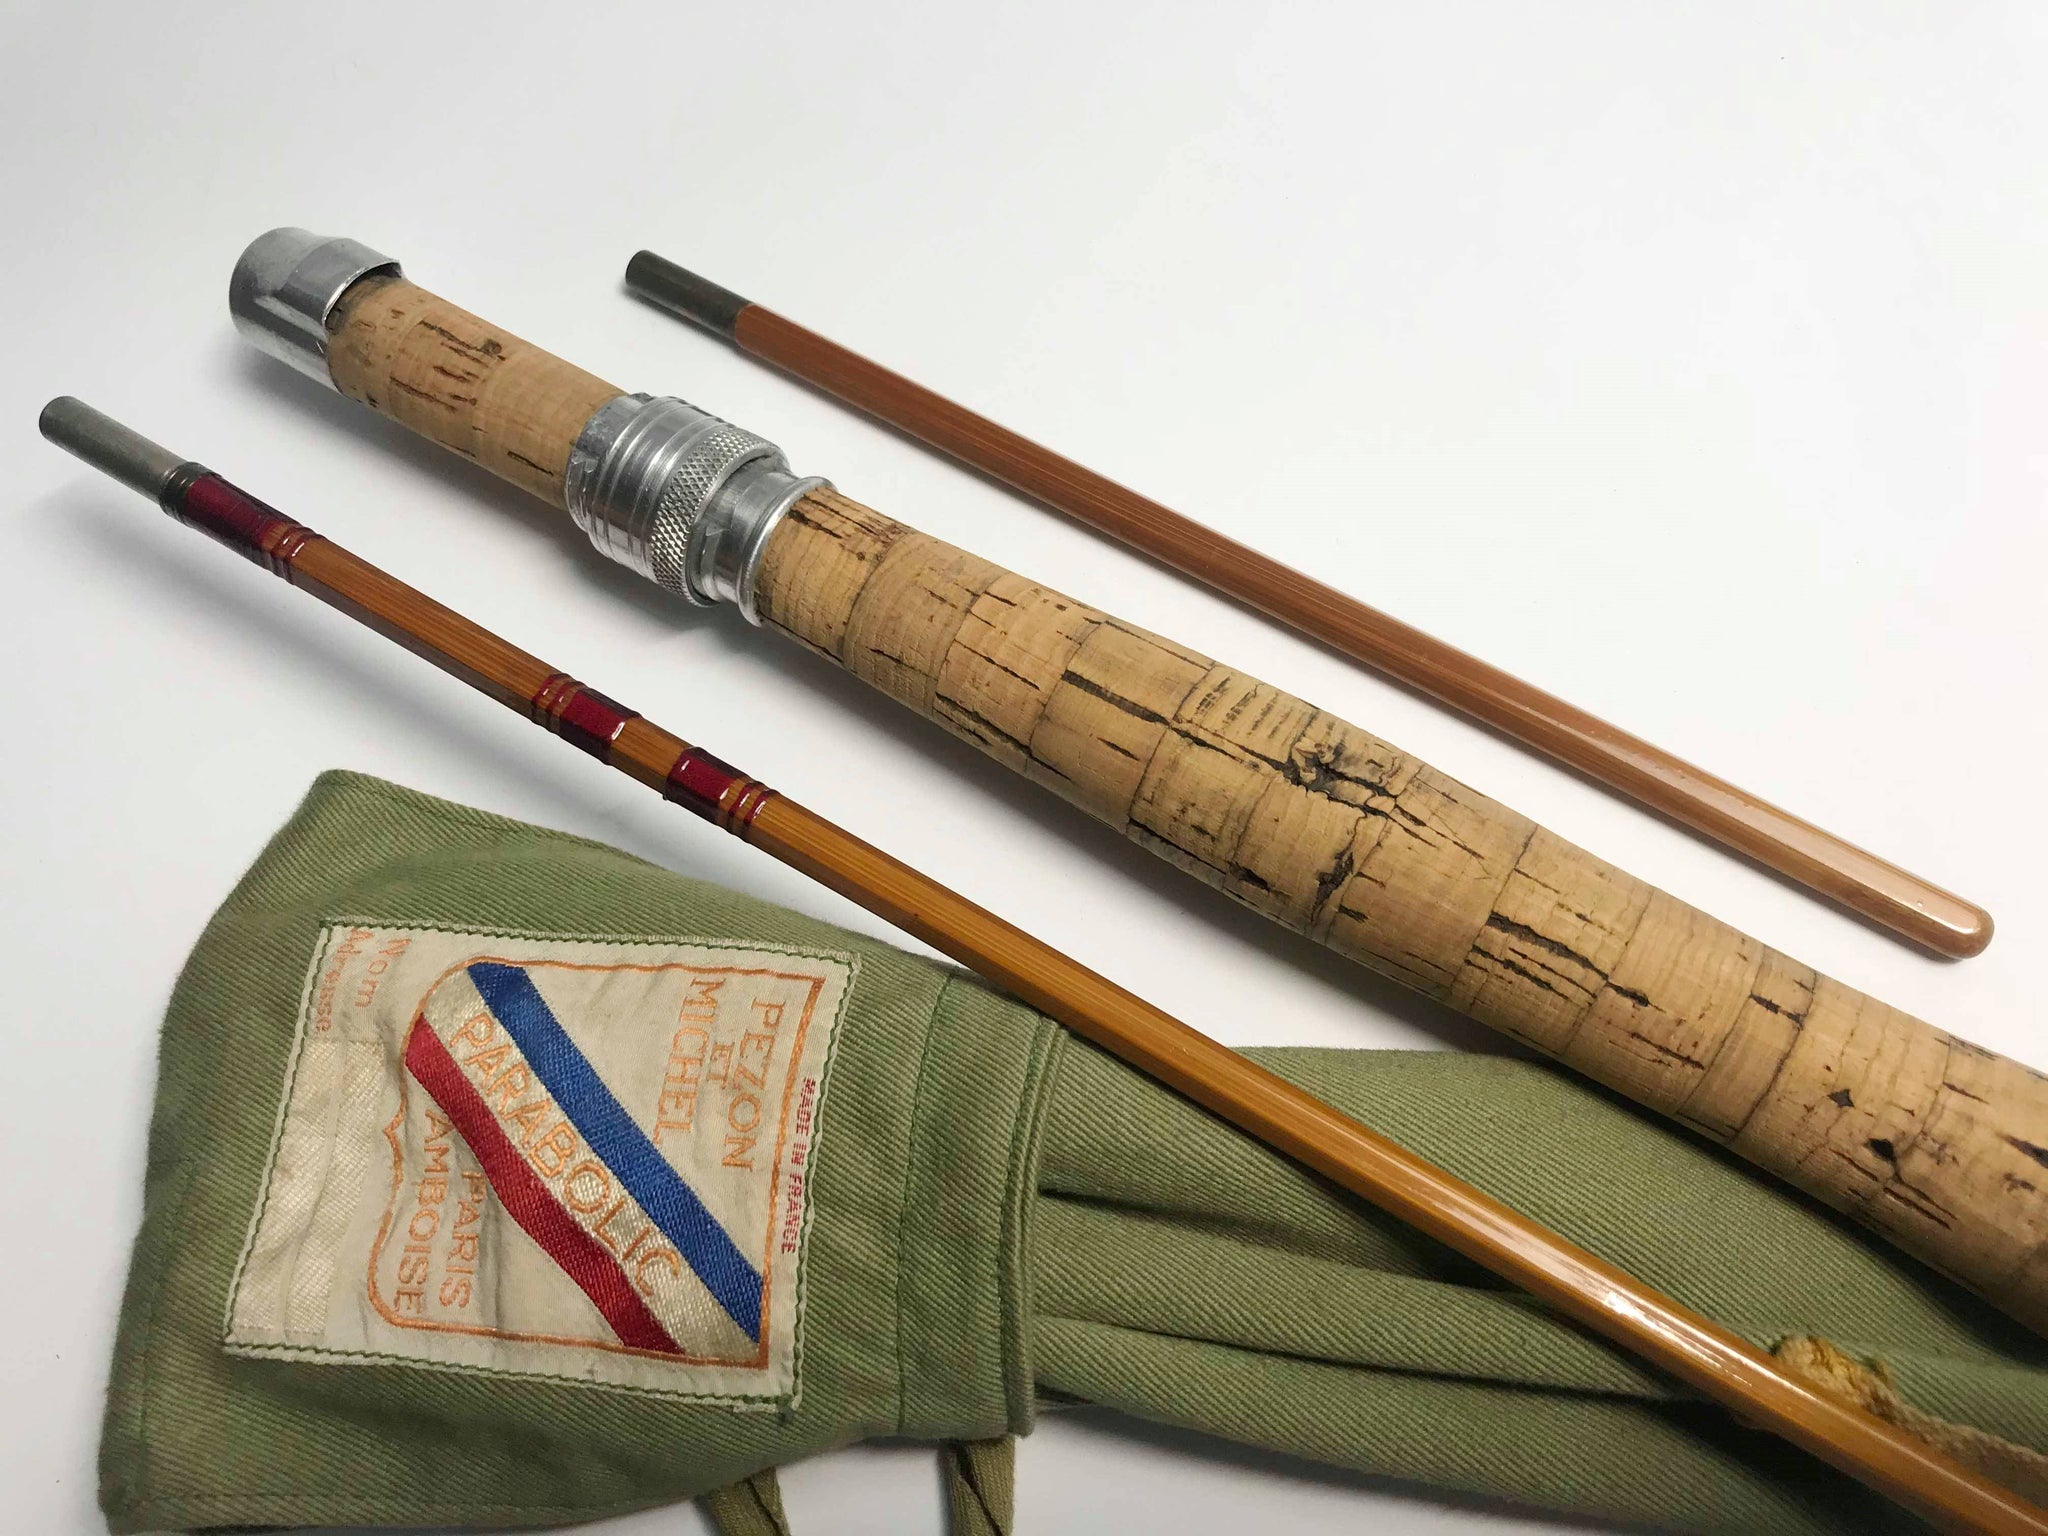 https://irelandsantiquefishingtackle.com/cdn/shop/products/pEZON_COMPETITOR_PARABOLIC_SPECIAL_FRENCH_VINTAGE_FISHING_ROD_2_1024x1024@2x.jpg?v=1579771643